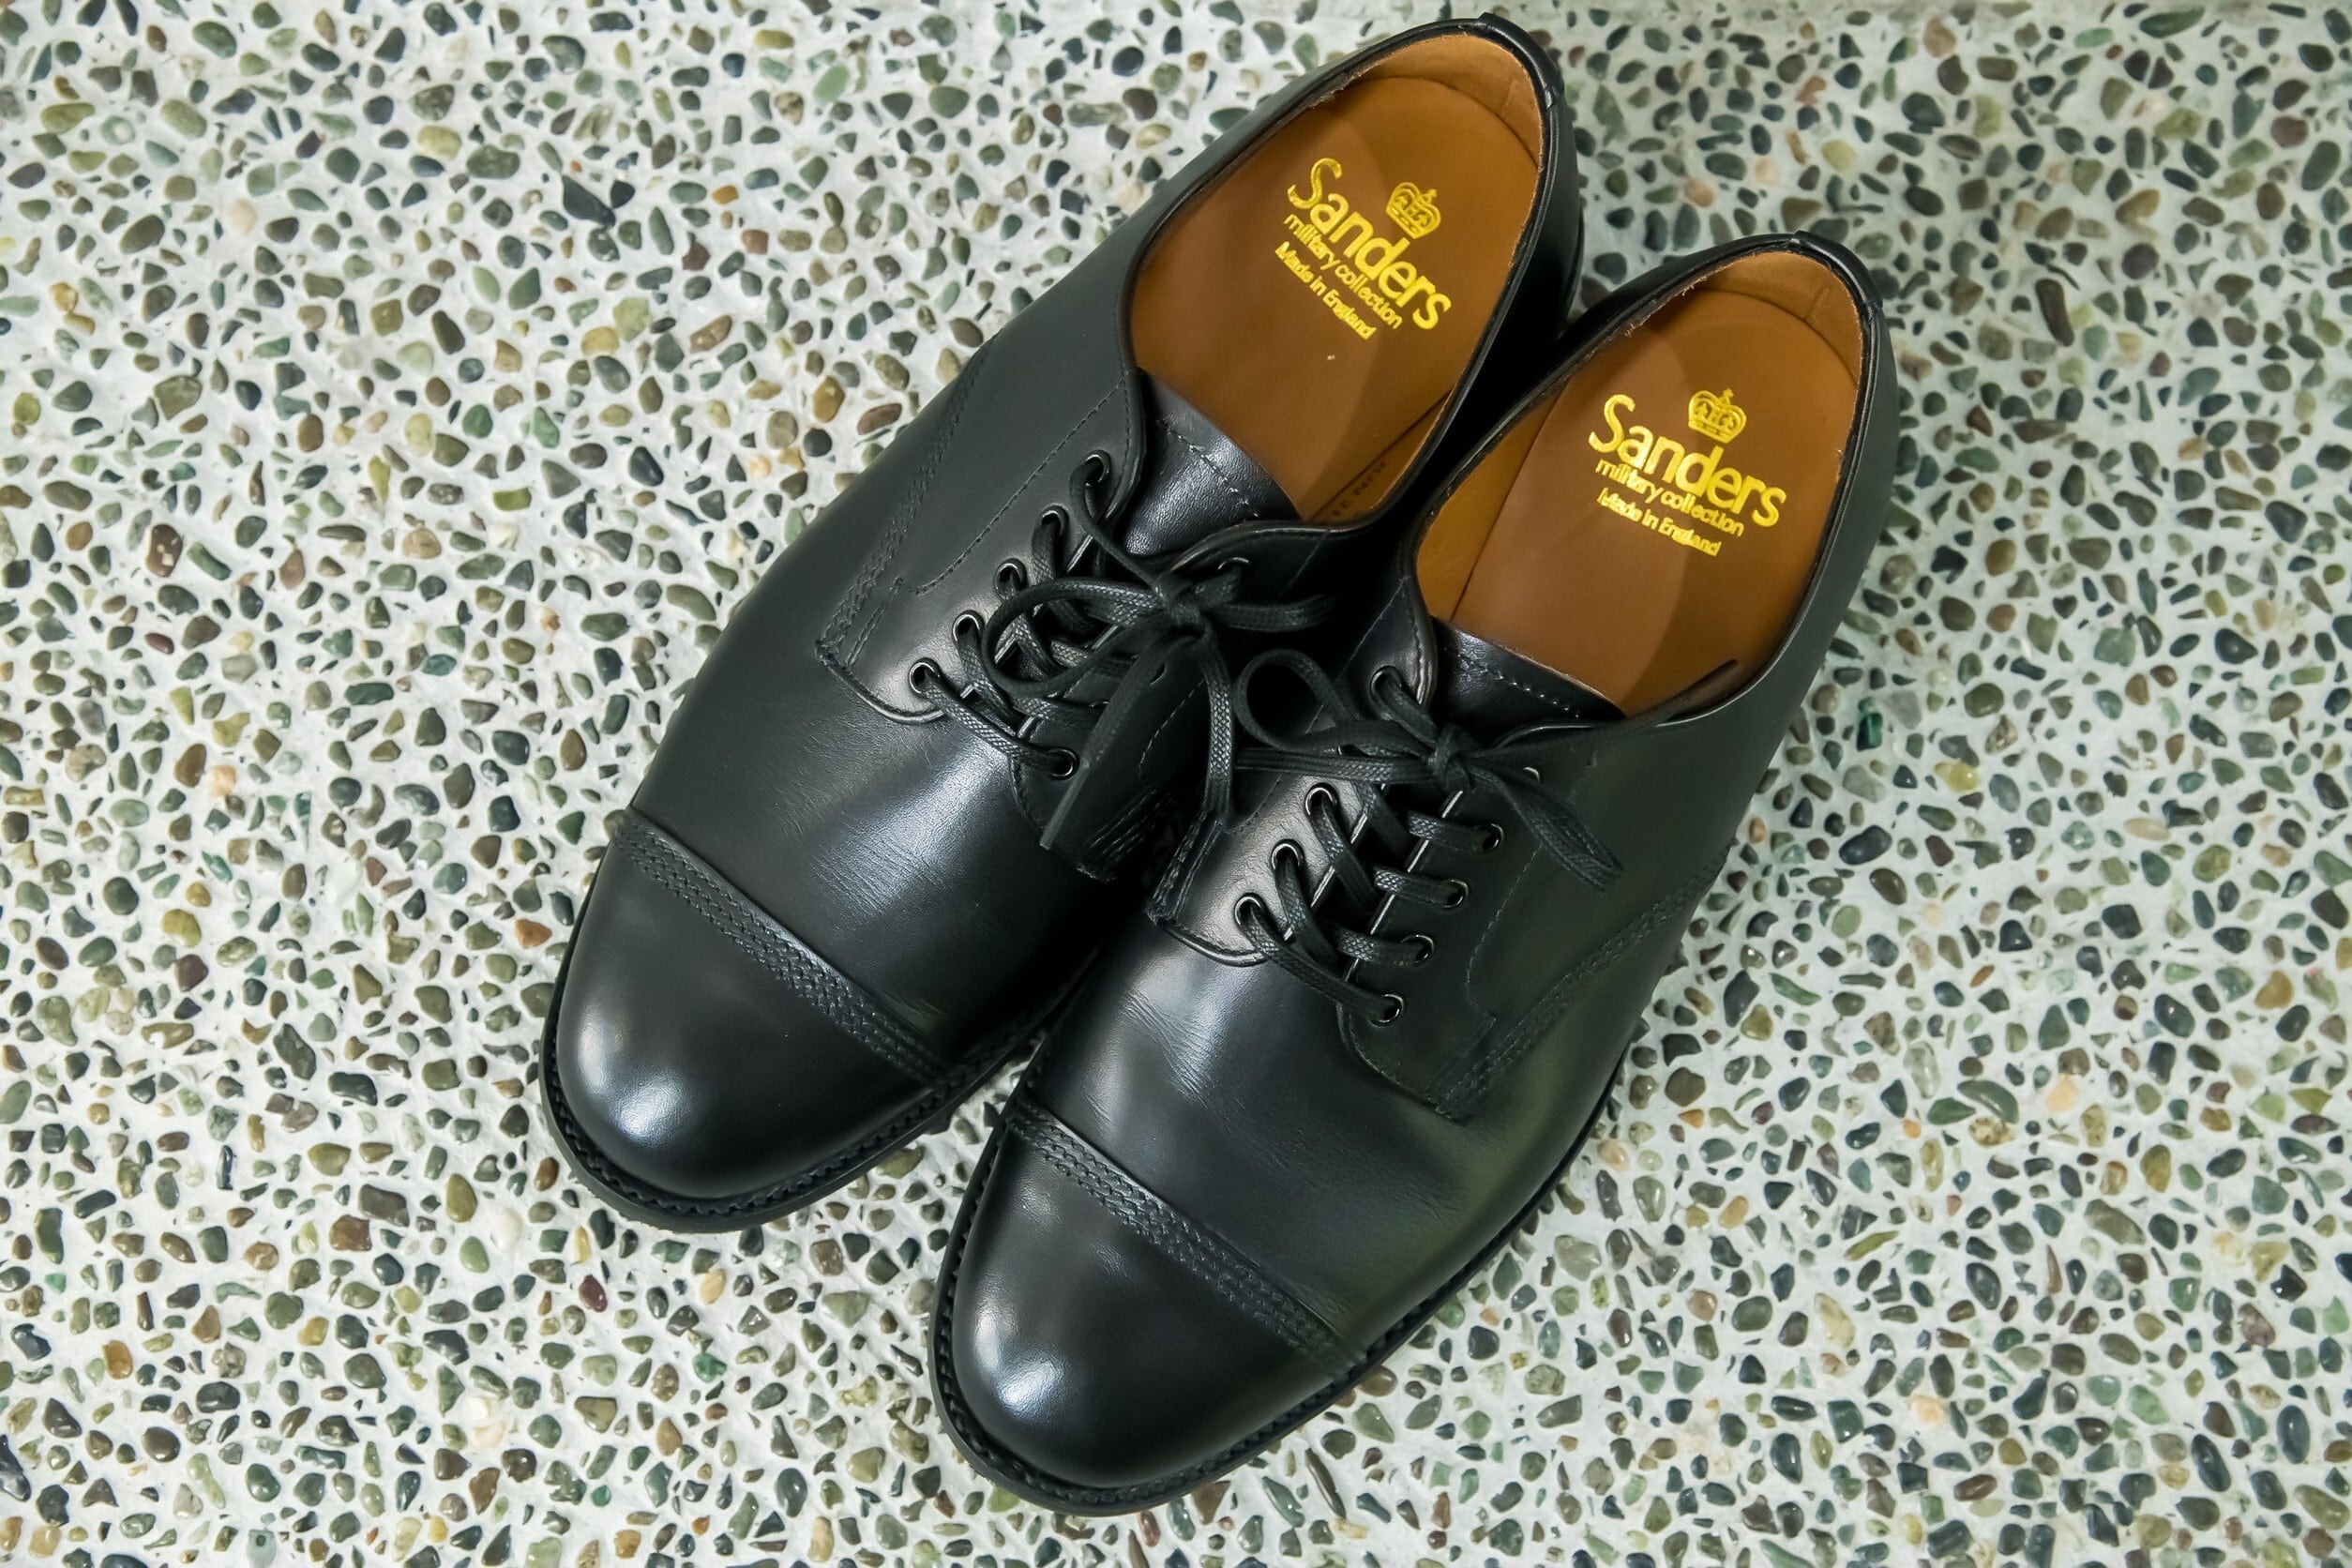 SANDERS スエード 別注 MILITARY NO LACE SHOE 8